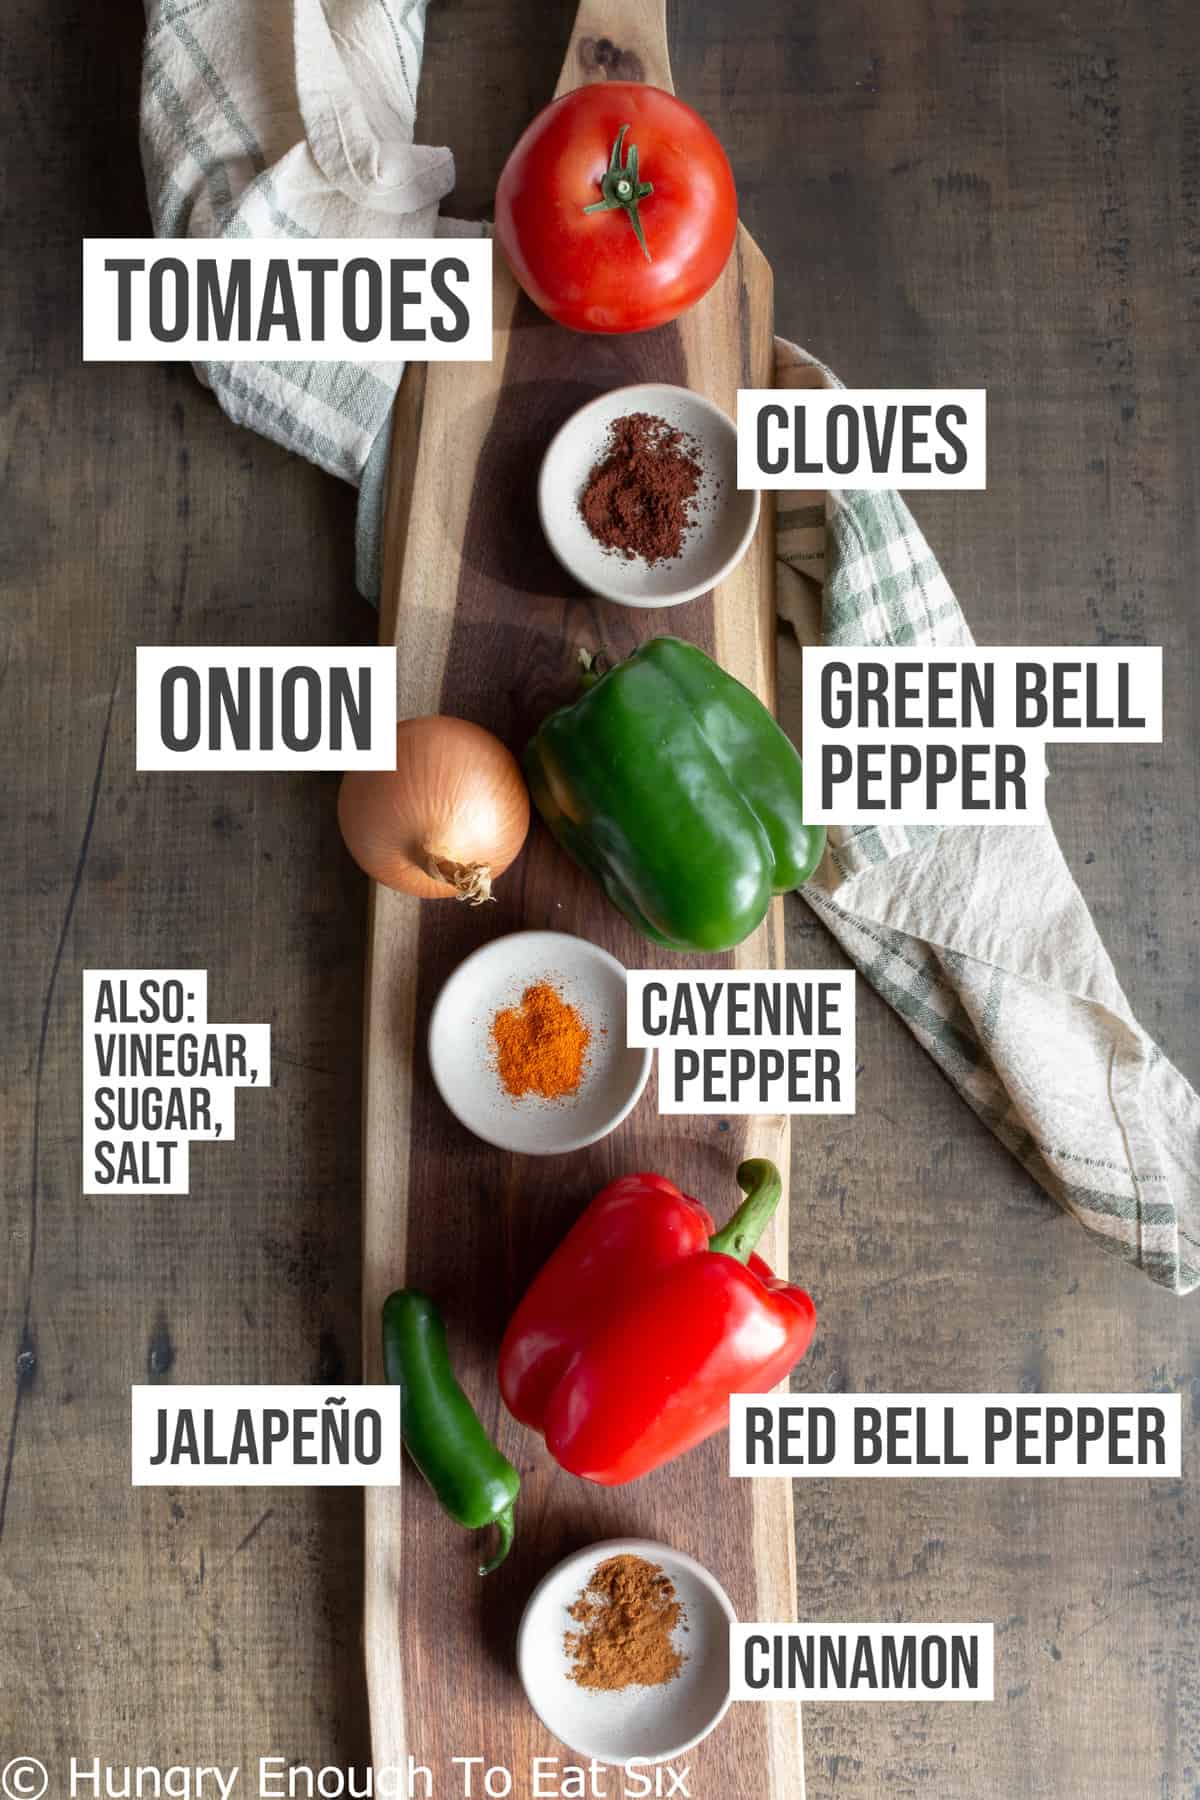 Ingredients: Peppers, tomatoes, onion, cinnamon, cloves, cayenne, jalapeno.